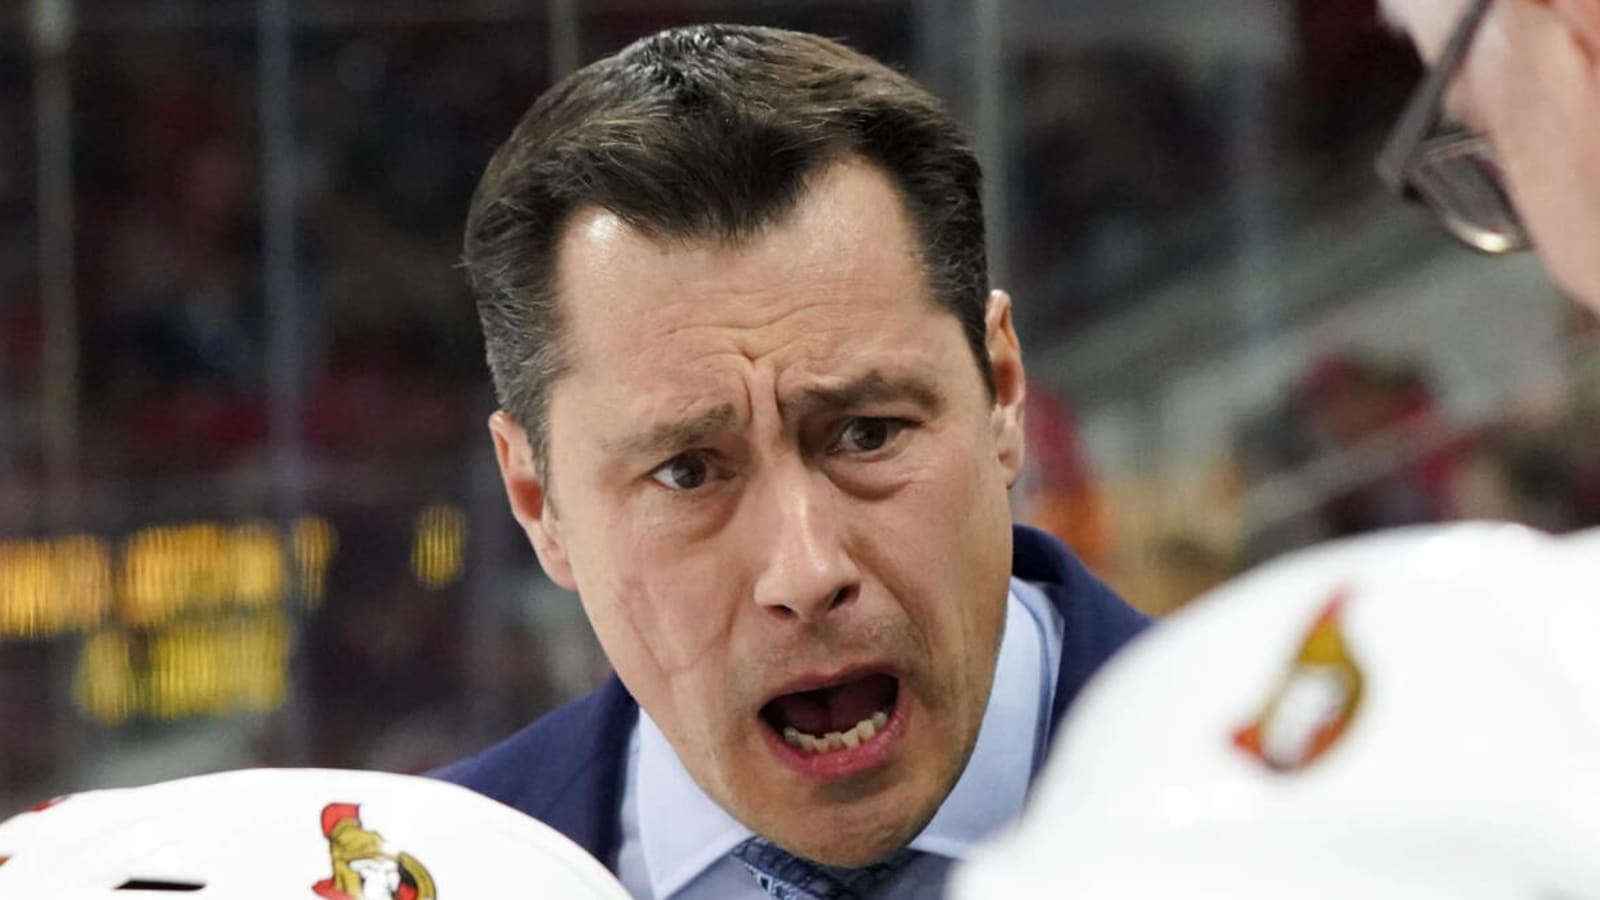 Leafs fans disturbed by Guy Boucher’s work this season